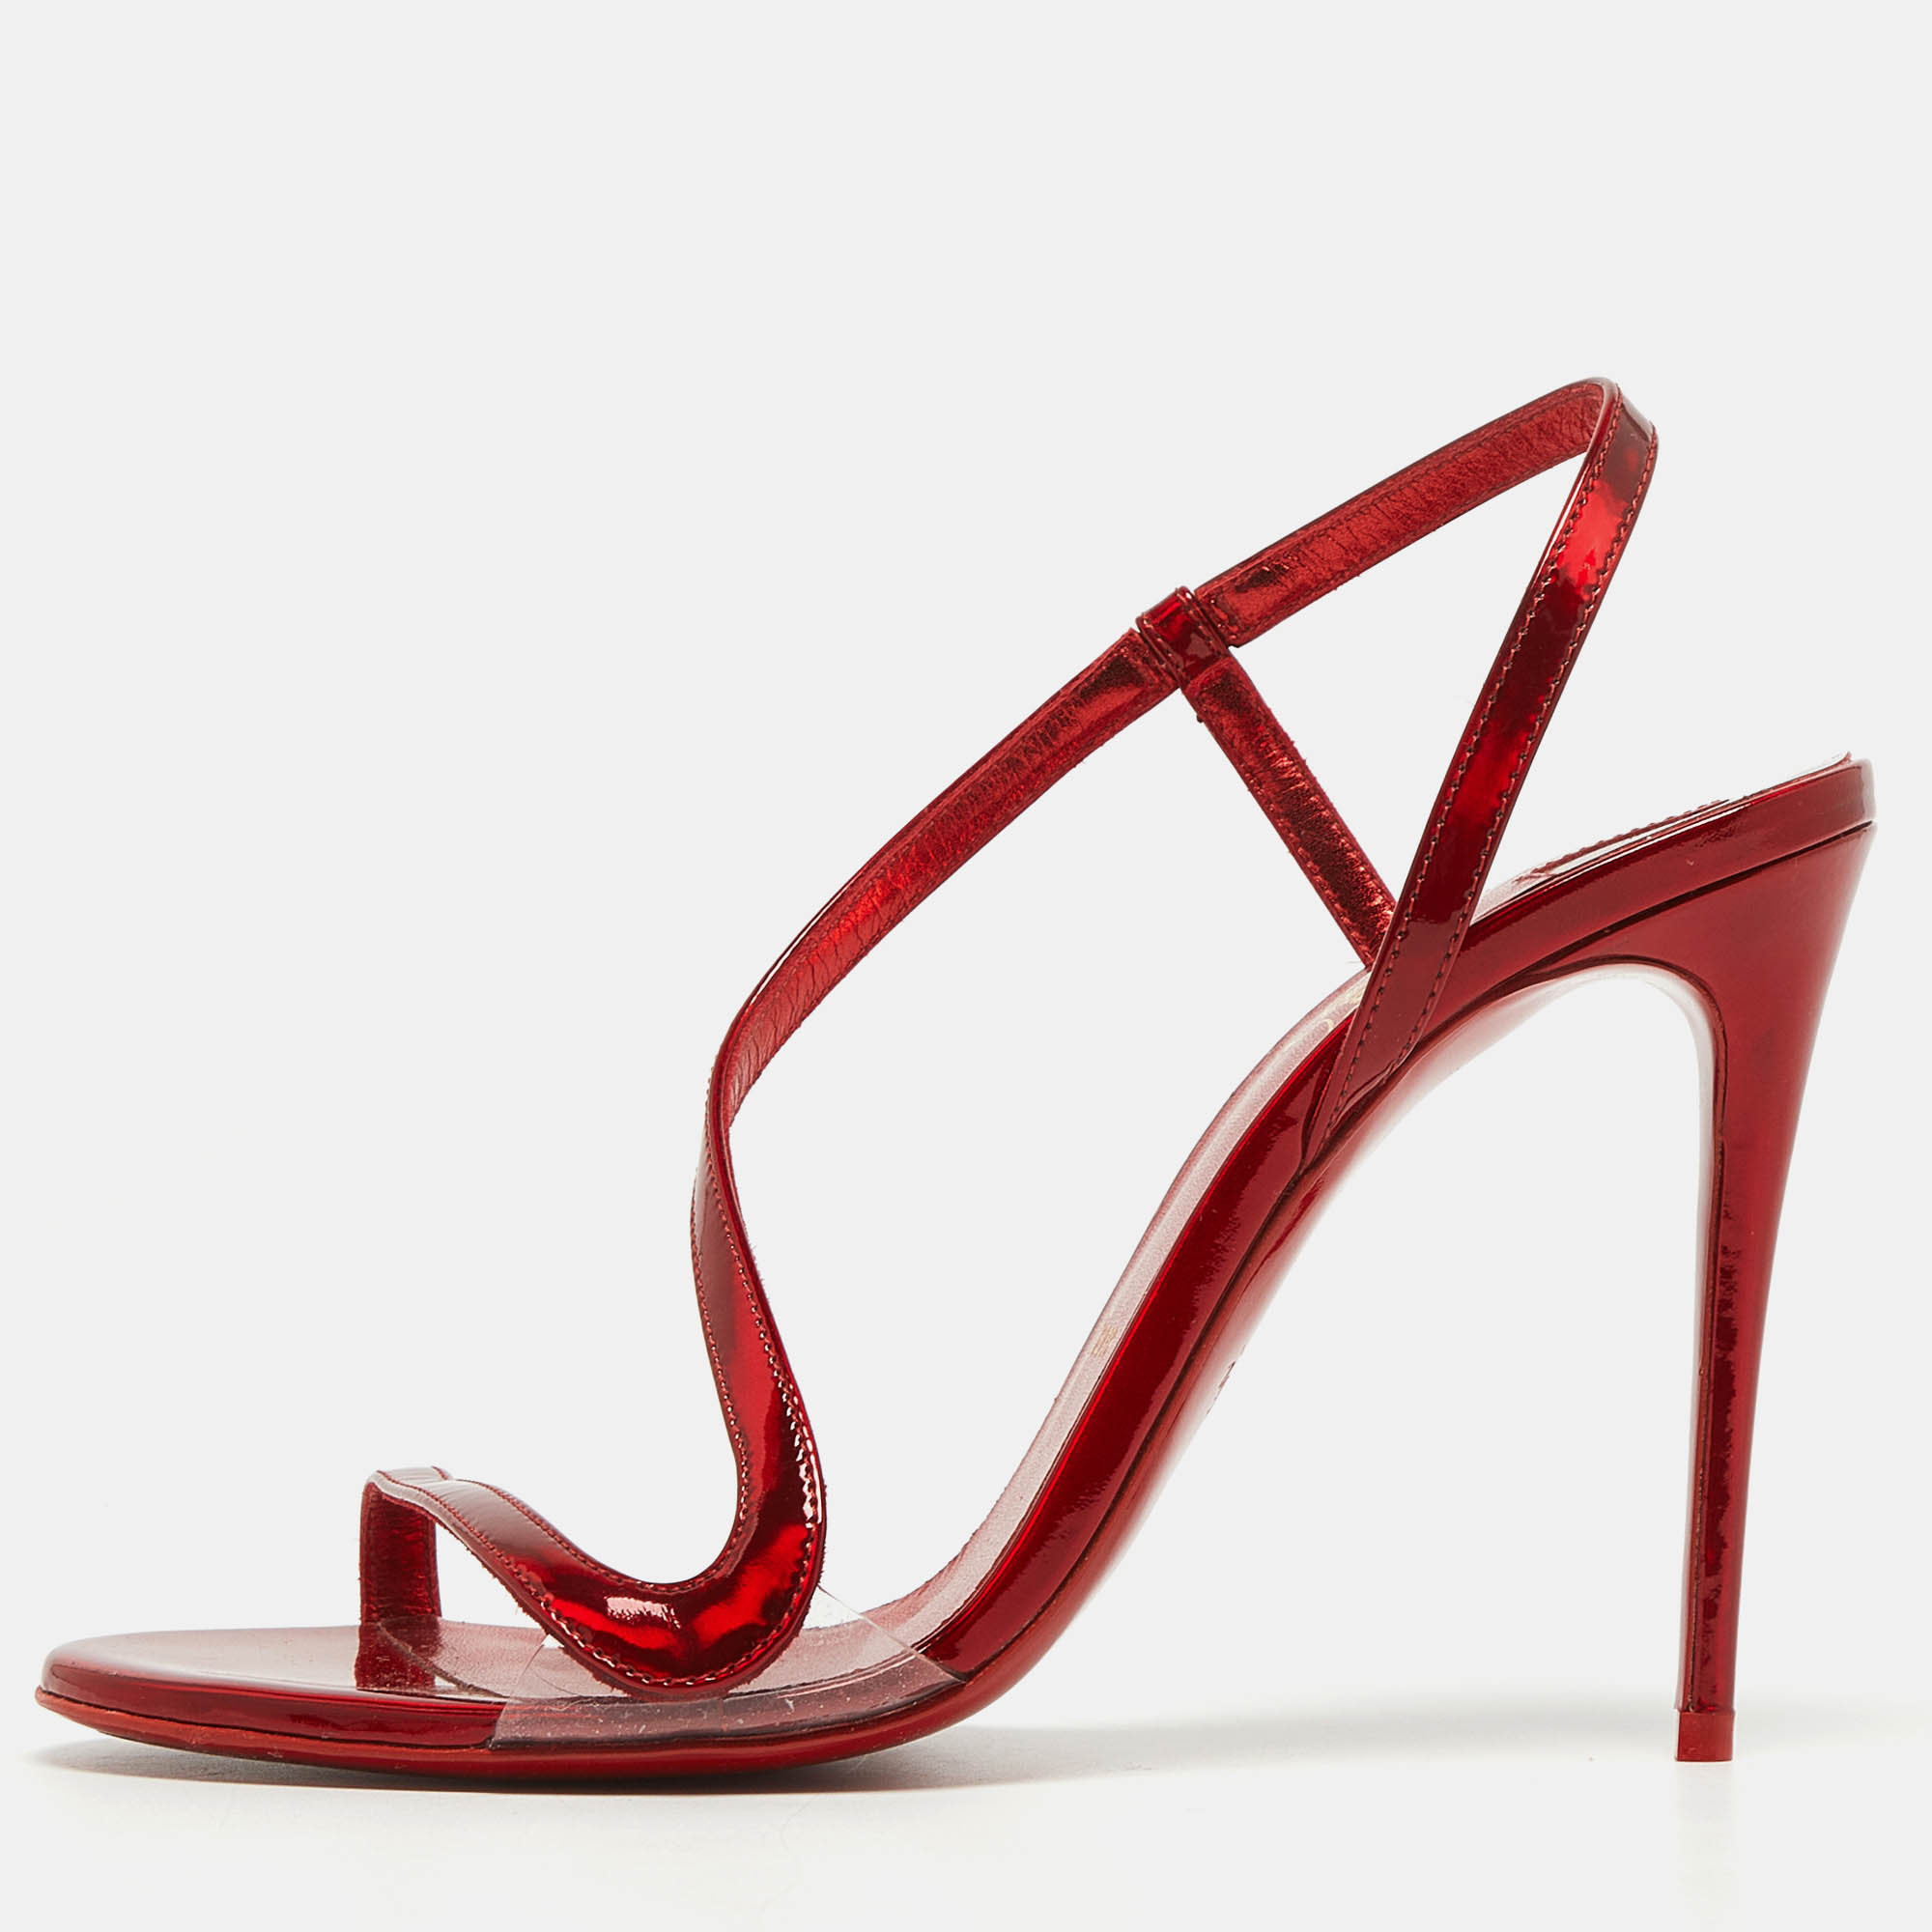 Christian louboutin metallic red leather rosalie sandals size 37.5